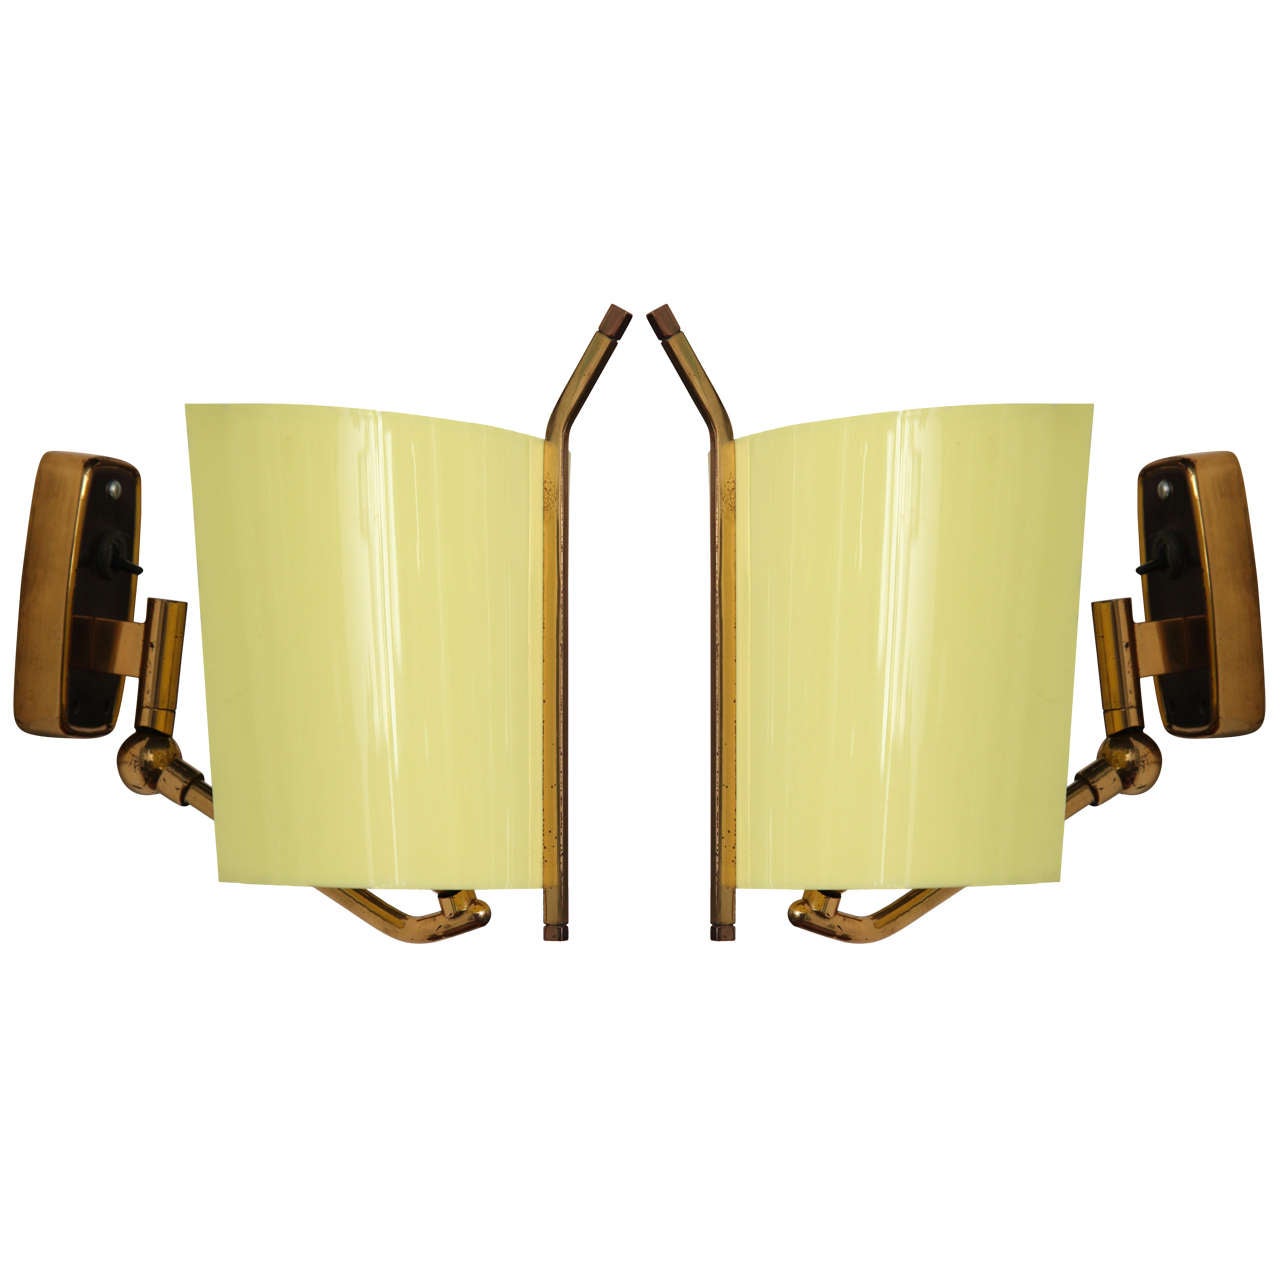 Pair of modernist sconces made in 1955 in Milan by Stilnovo.
Soft yellow plexiglas shades with brass adjustable swing arms.
Great as bedside. Sconces signed on bar and back plate.
   